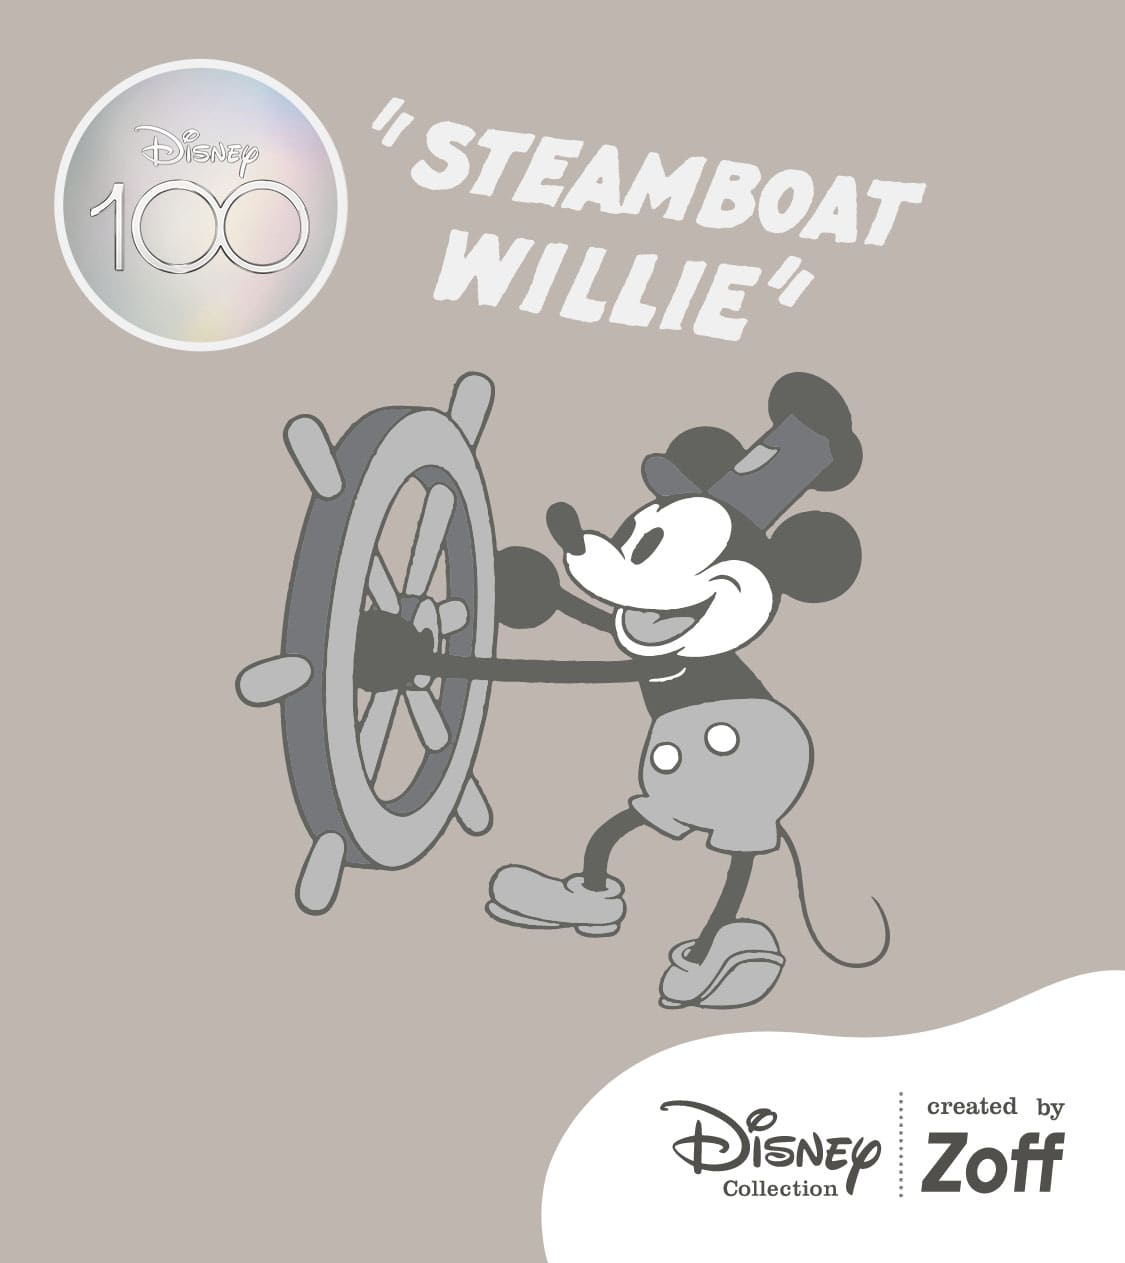 Disney Collection created by Zoff Disney100 “STEAM BOAT WILLIE 